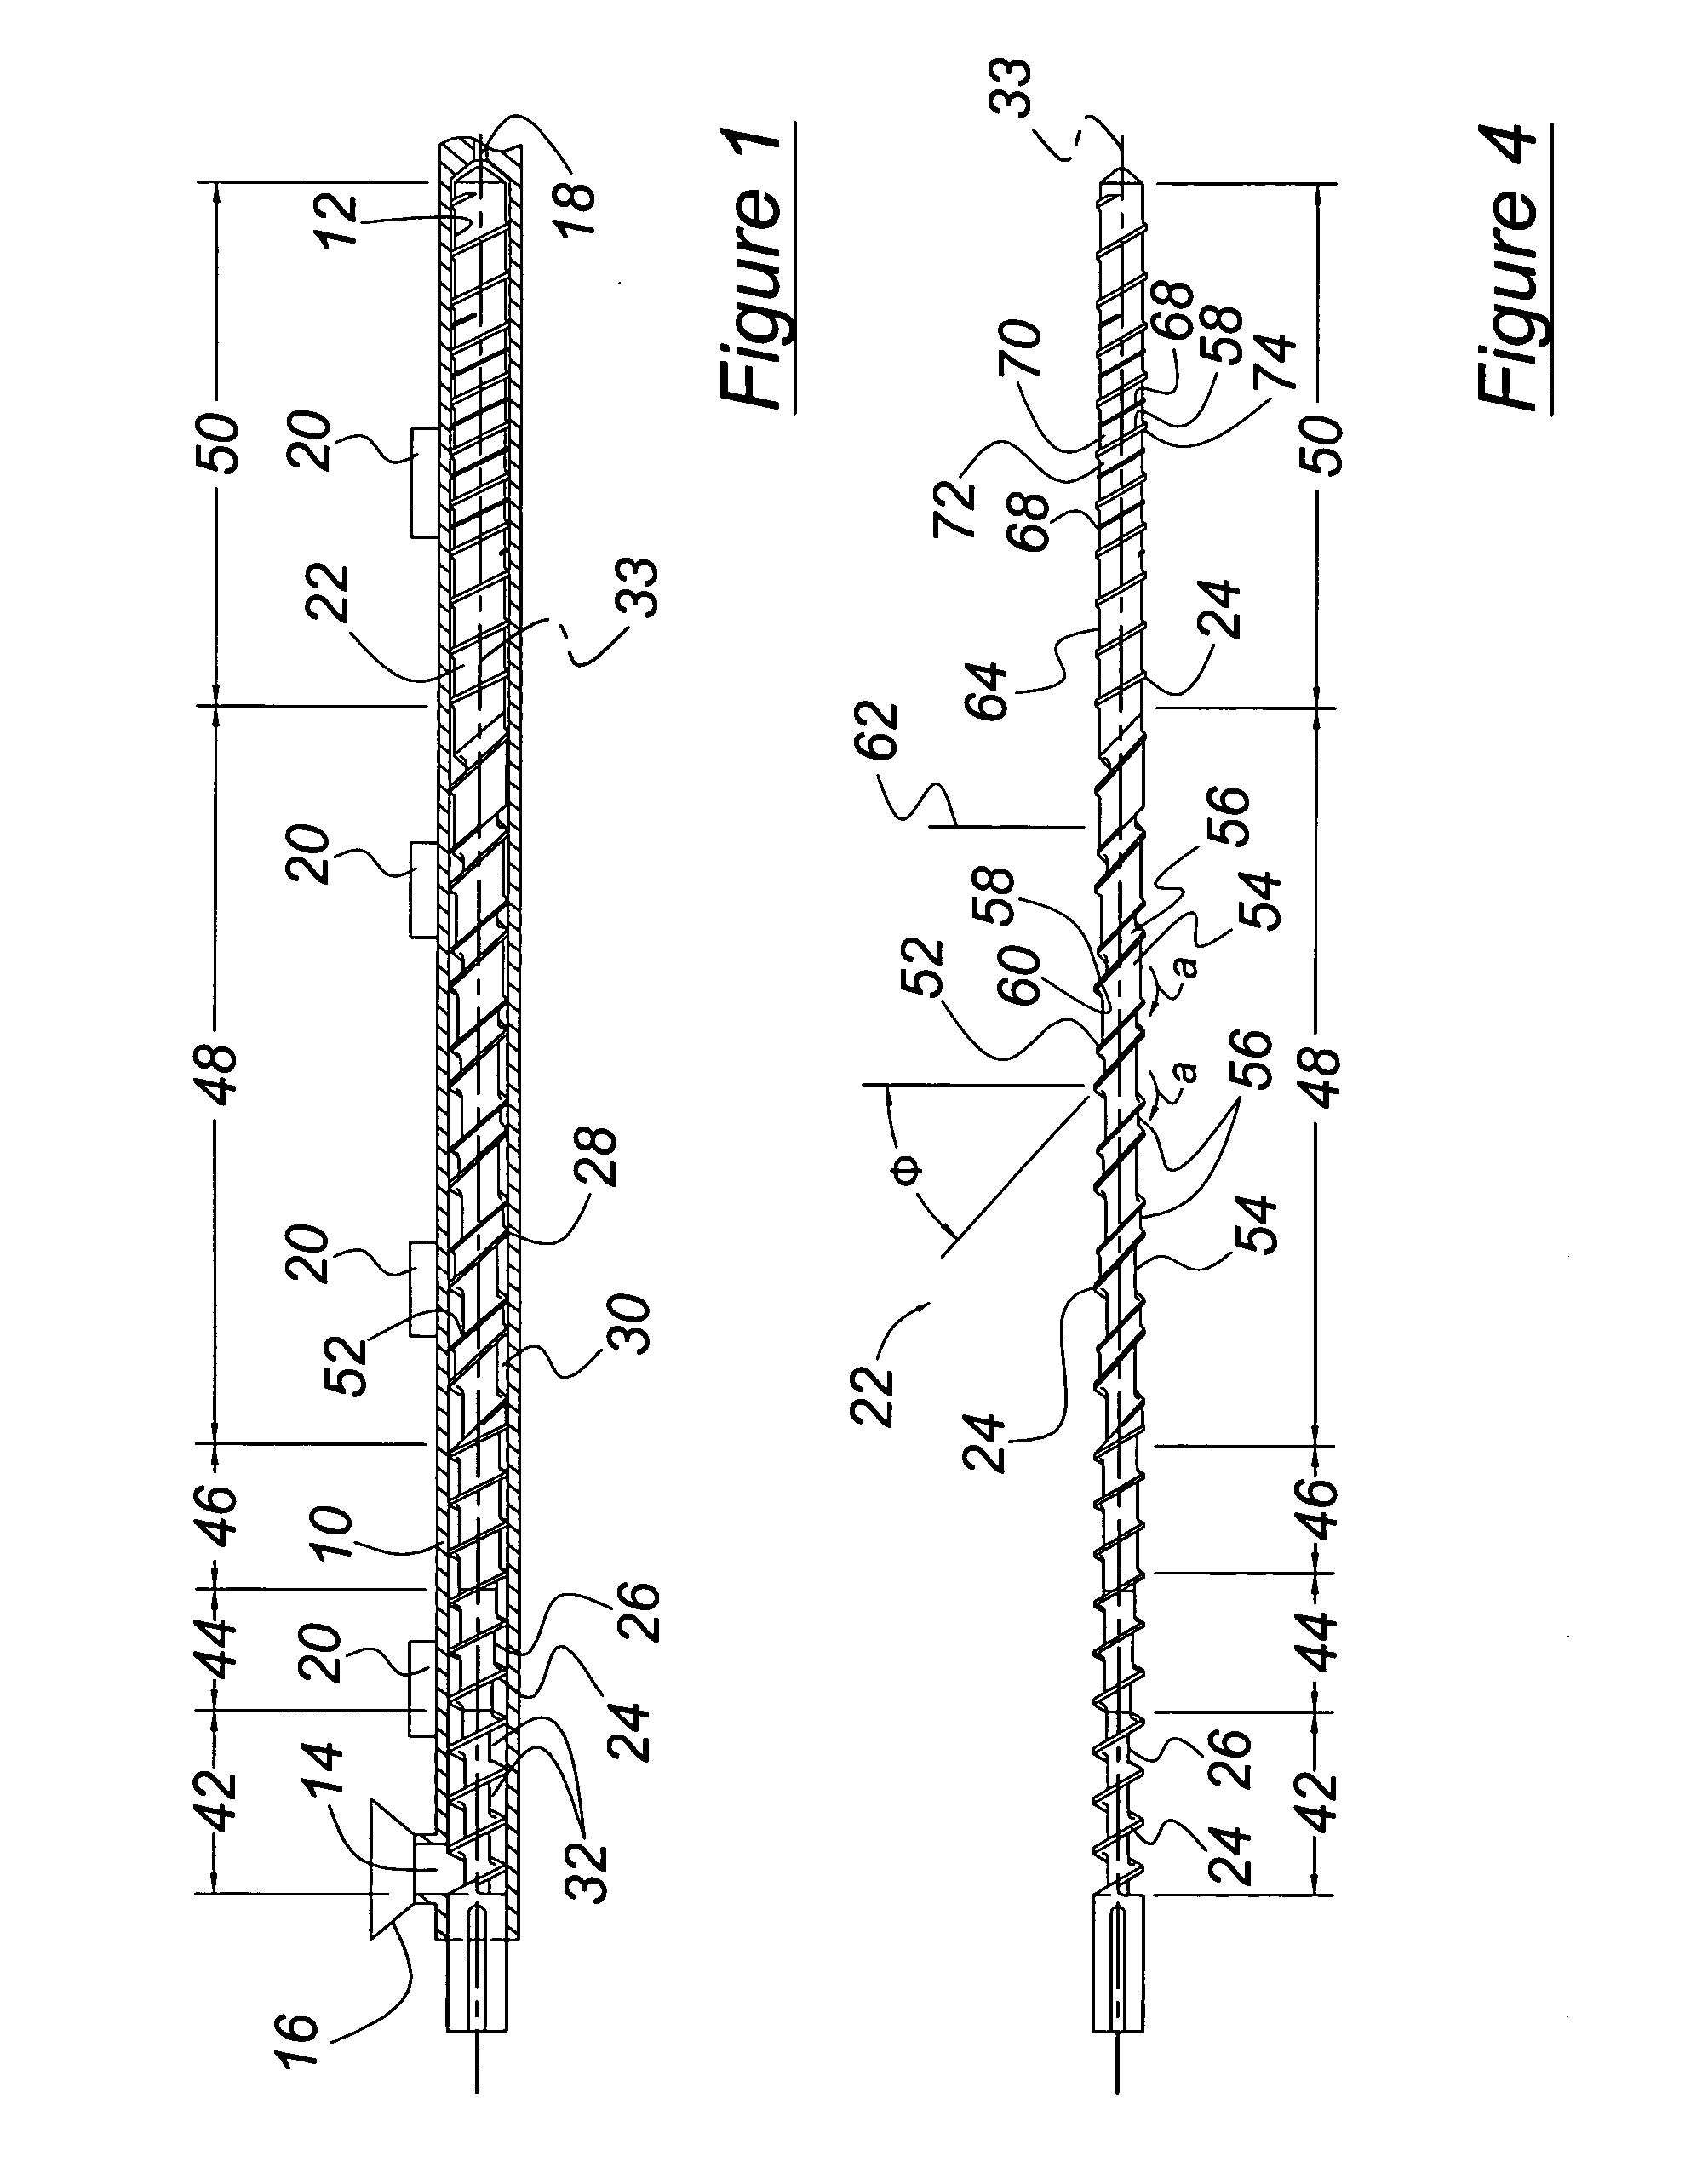 Apparatus for plasticating thermoplastic resin including polypropylene